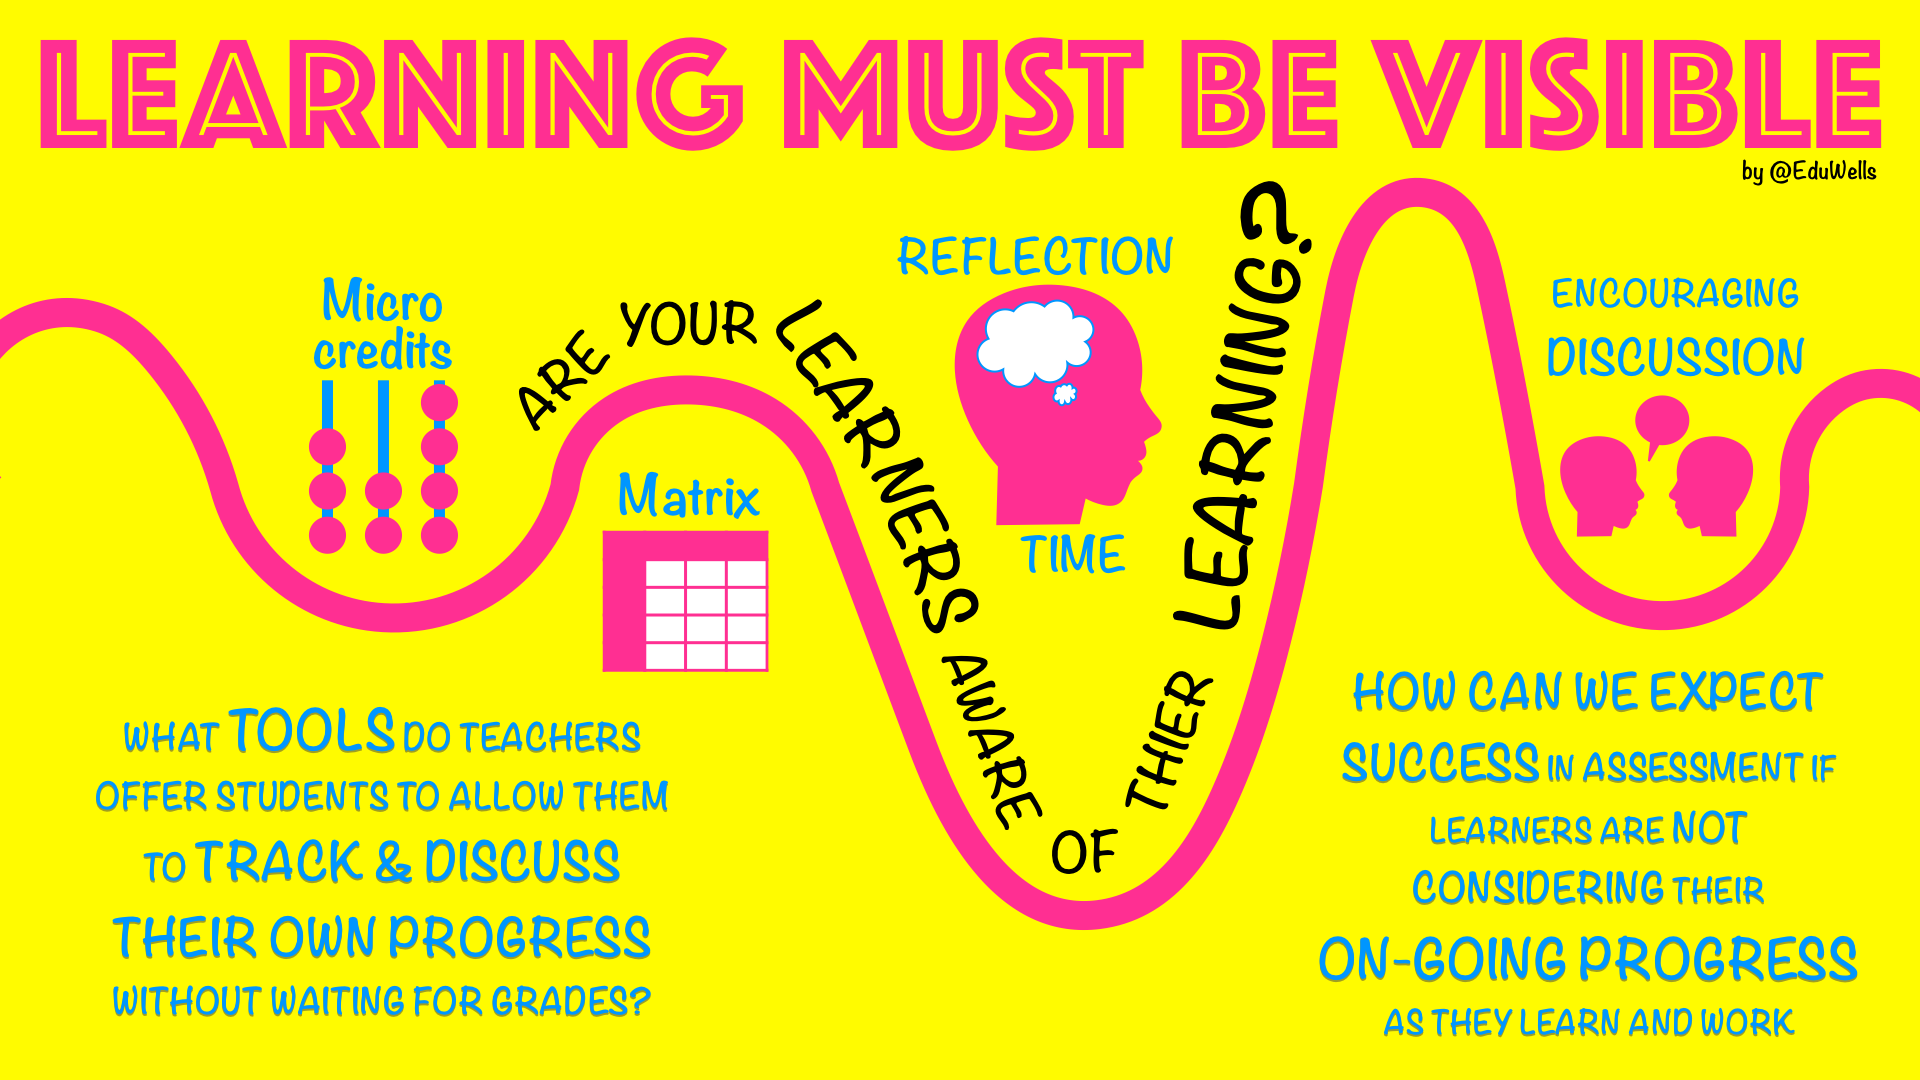 Does your classroom make learning visible? – EDUWELLS